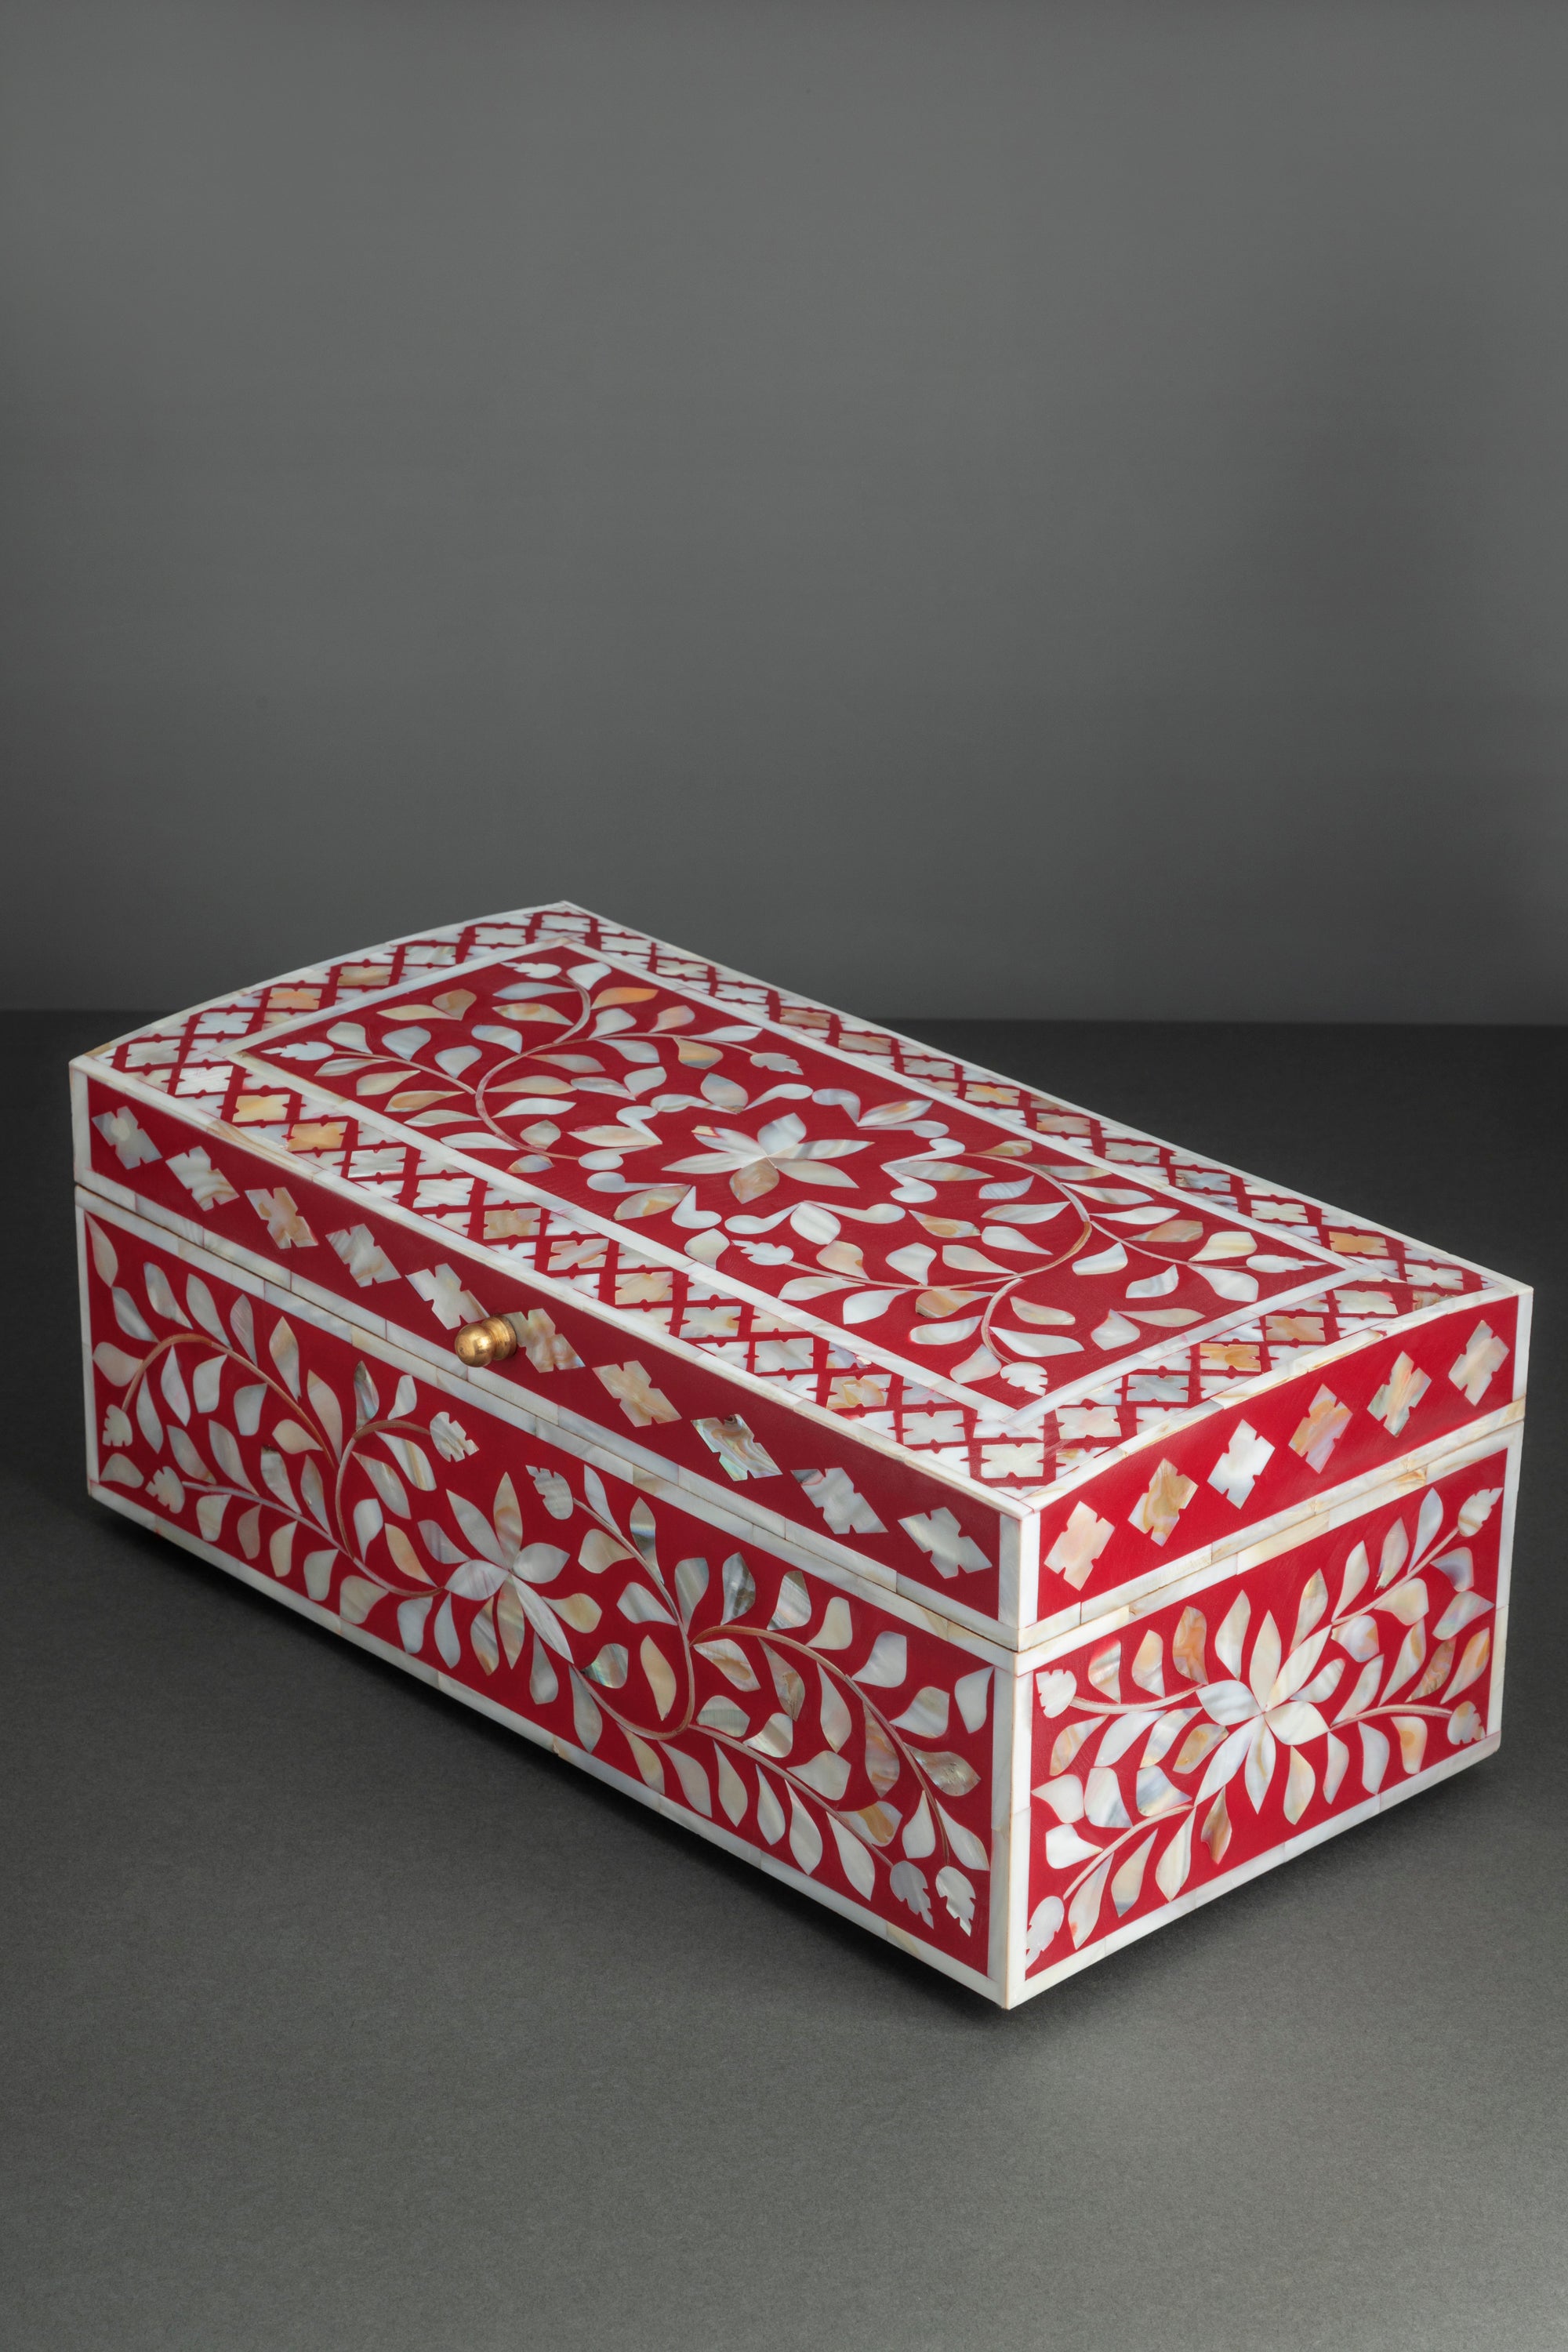 Decorative box for Home or Office 